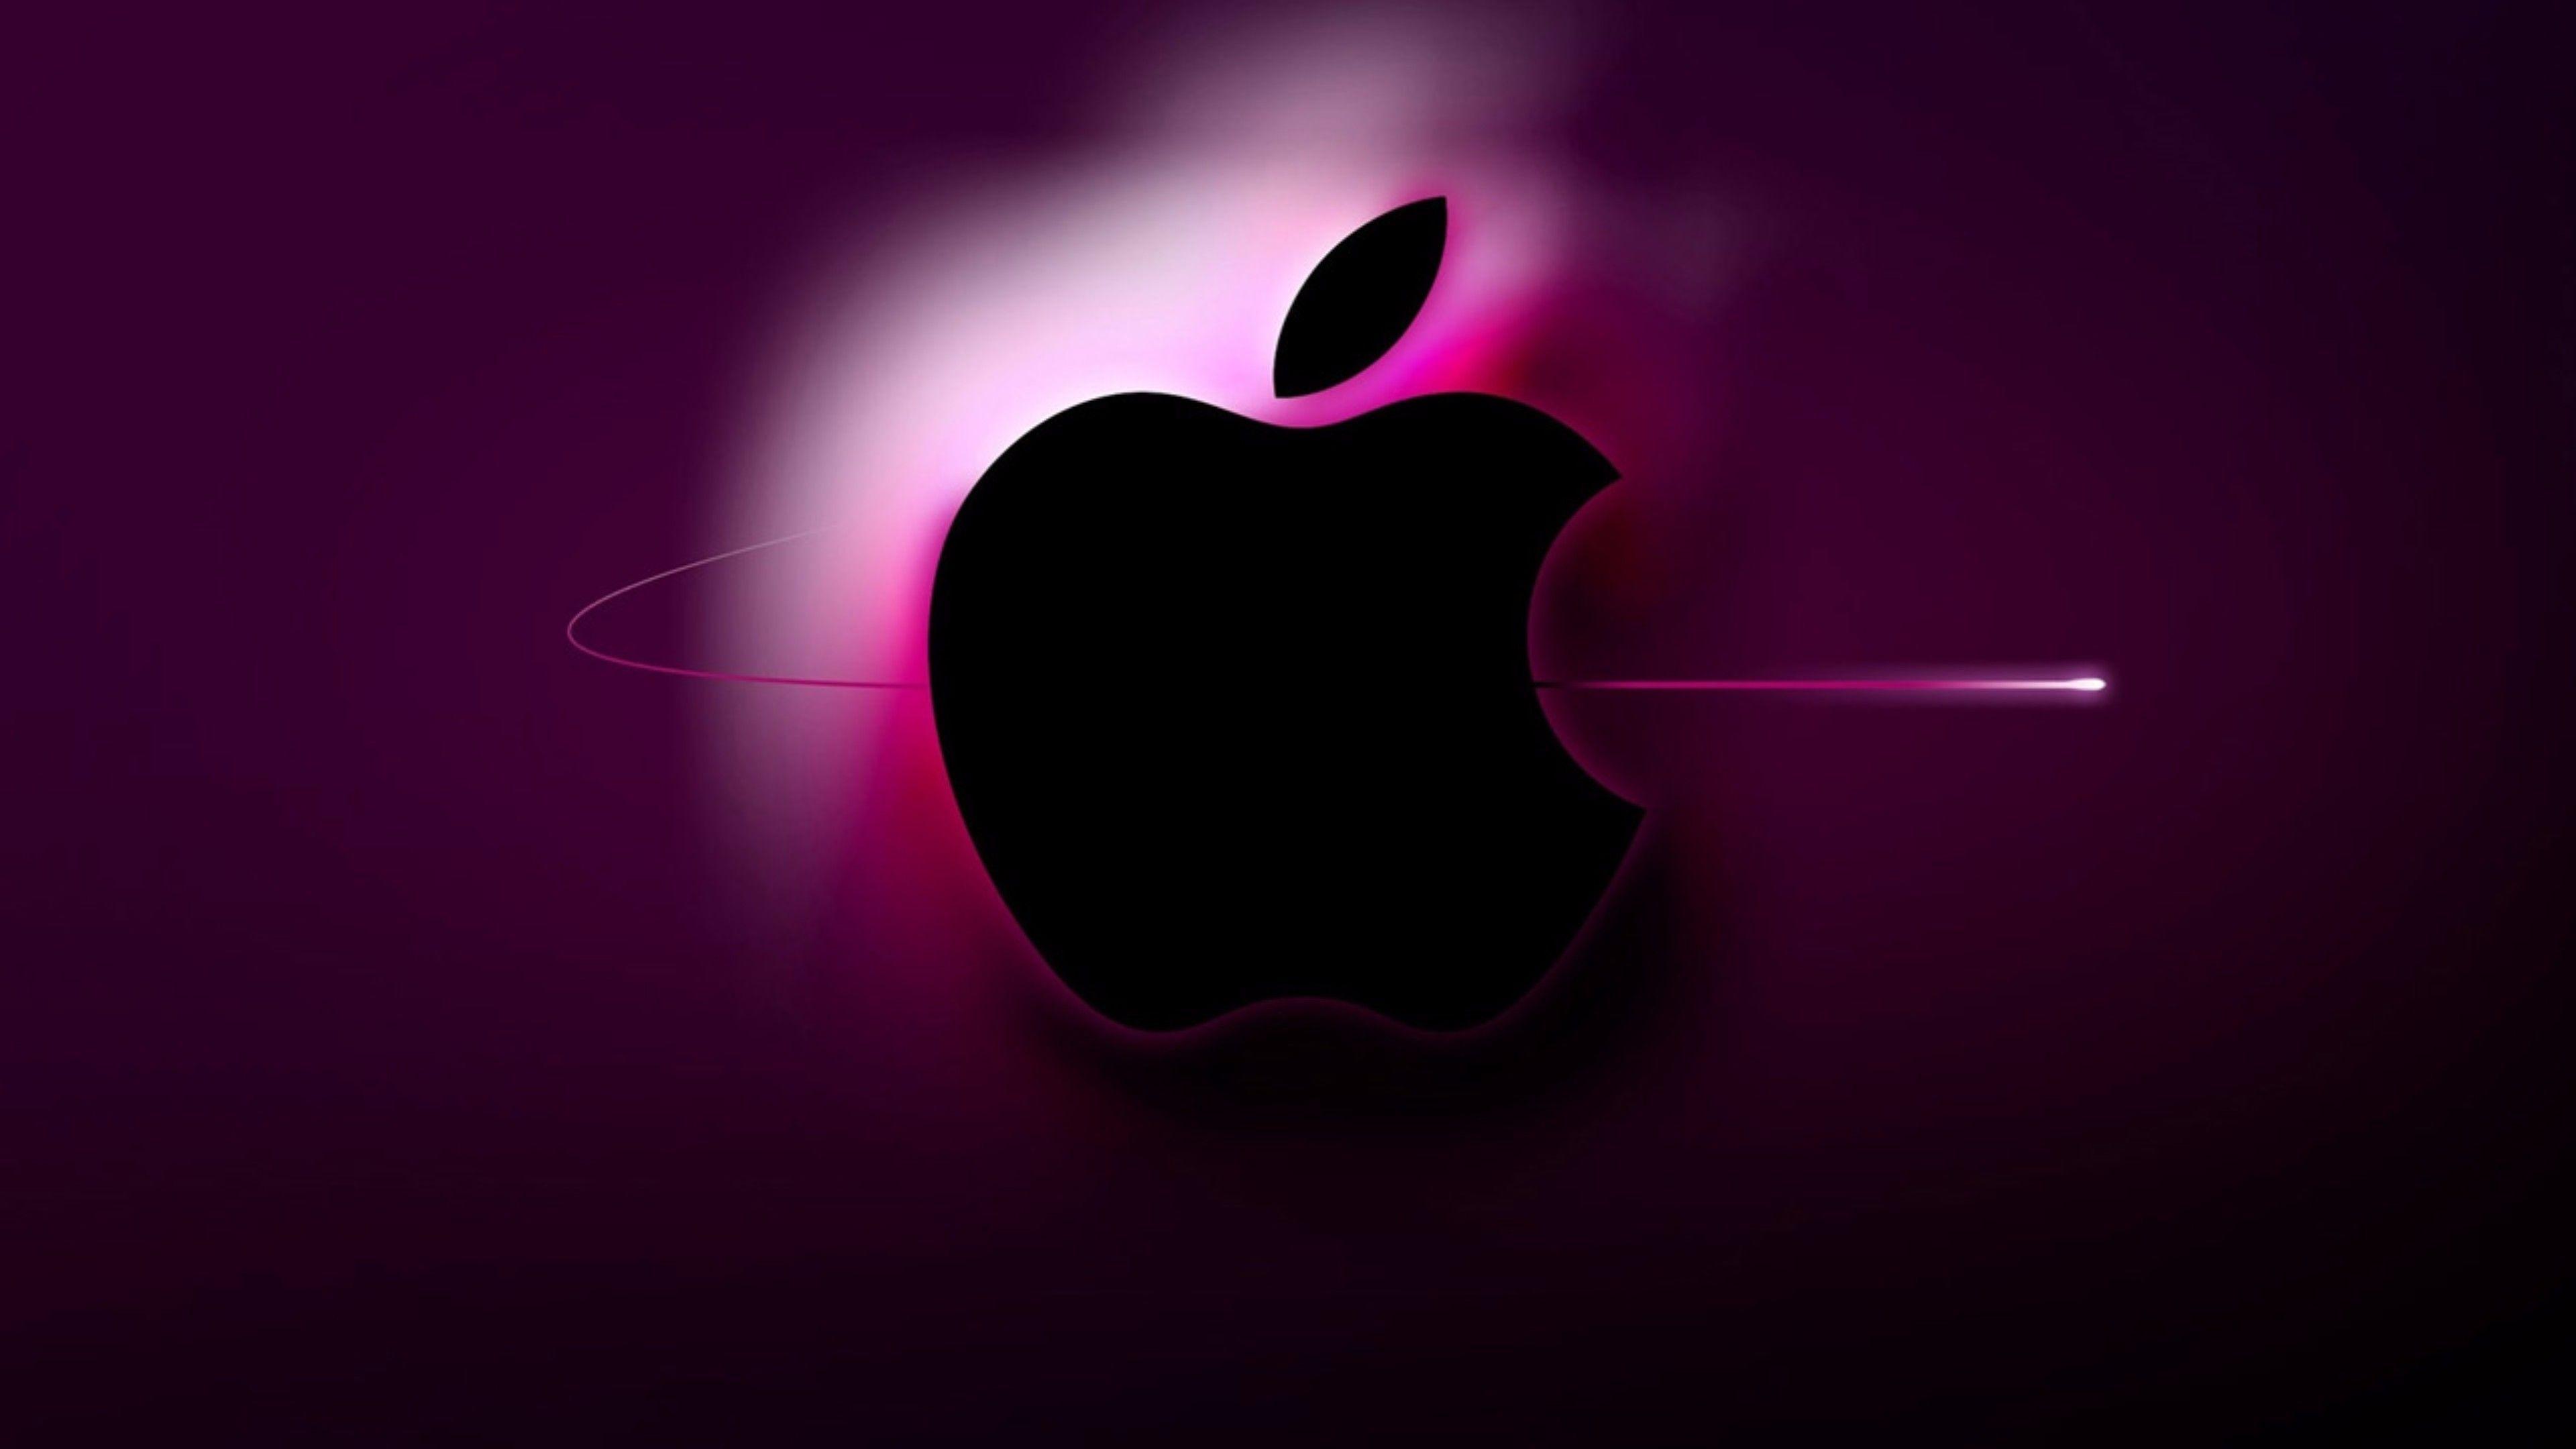 Awesome Apple Wallpaper 4K For Iphone Free